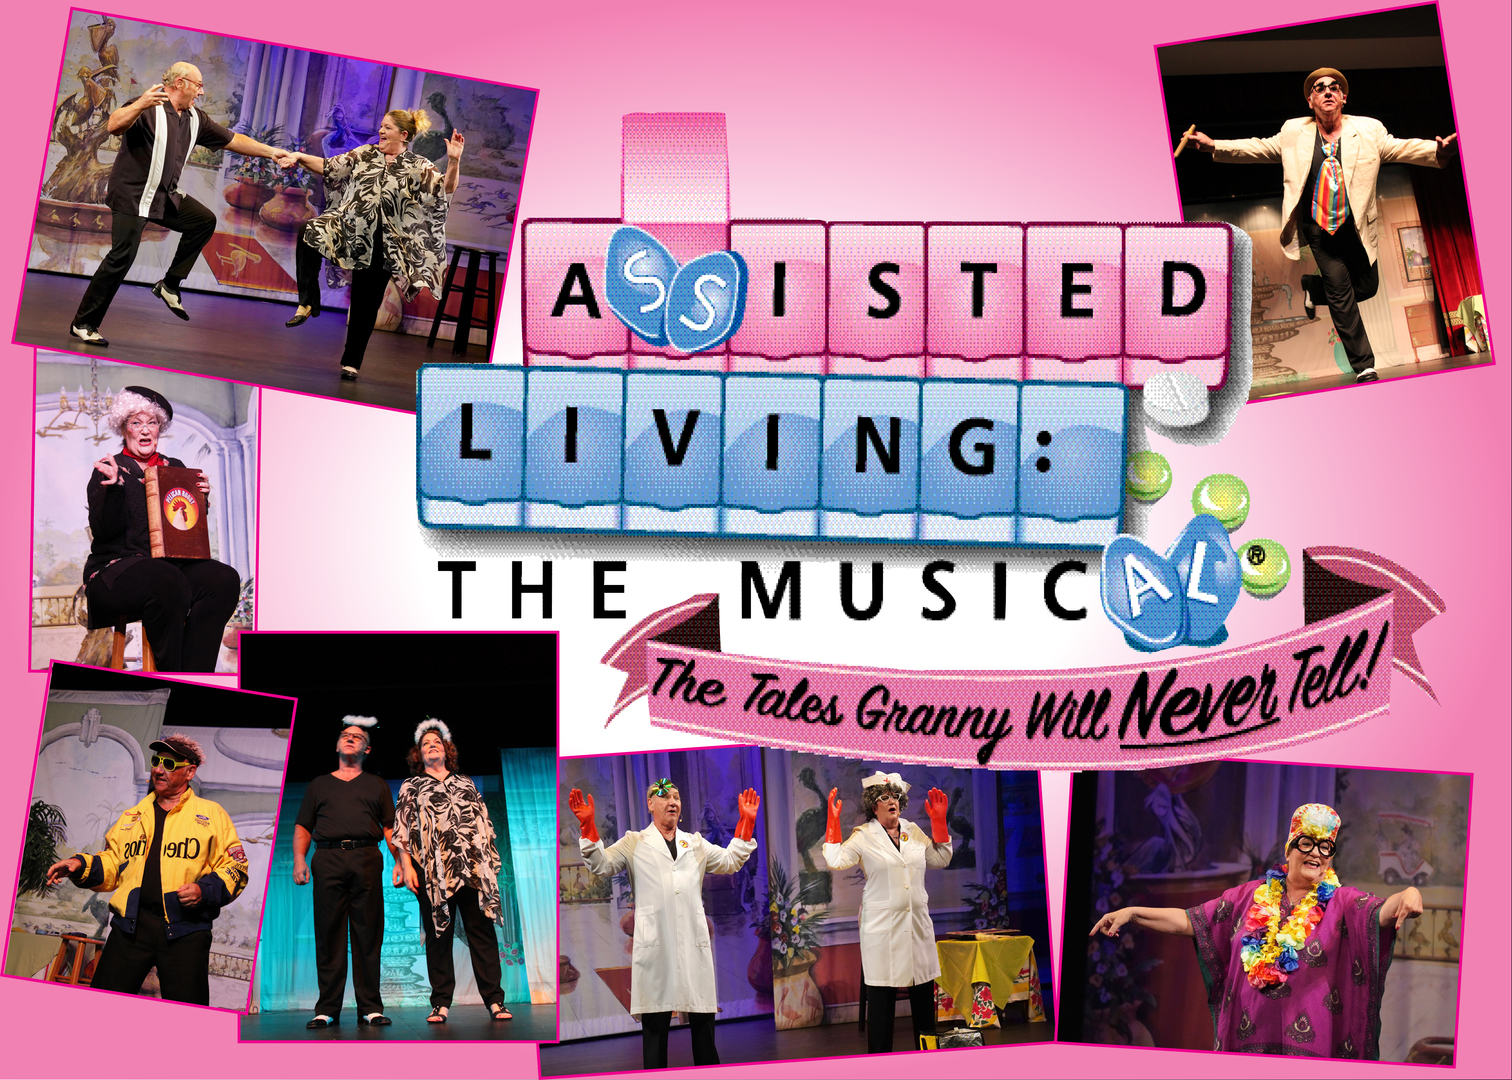 Assisted Living the Musical: The Tales Granny Will Never Tell will be at the VPAC on Aug 21 at 3pm!, Venice, Florida, United States